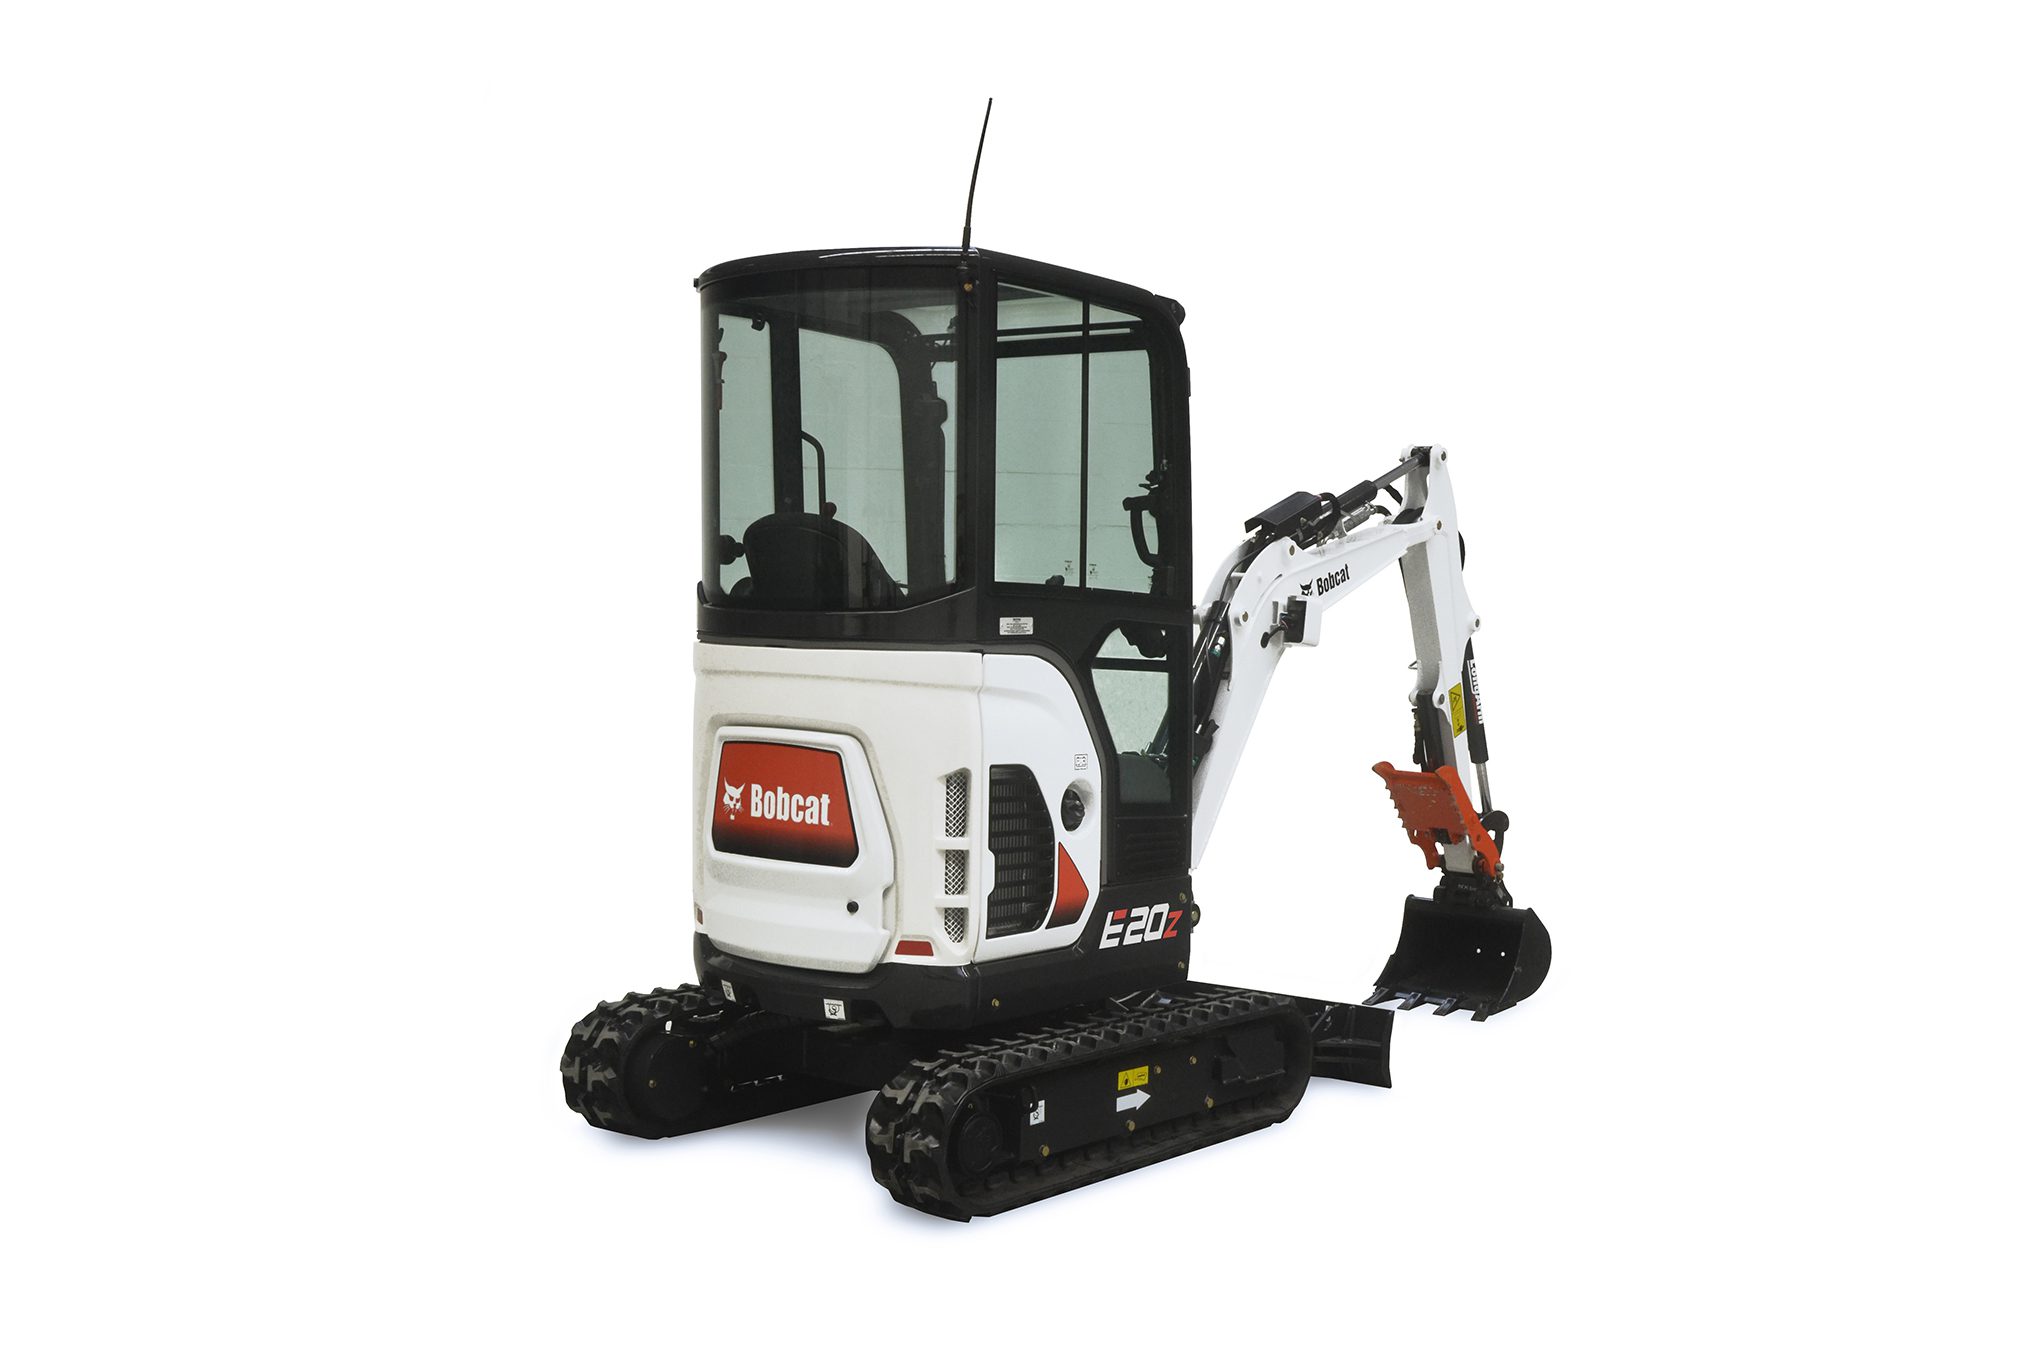 Browse Specs and more for the Bobcat E20 Compact Excavator - Bobcat of Huntsville